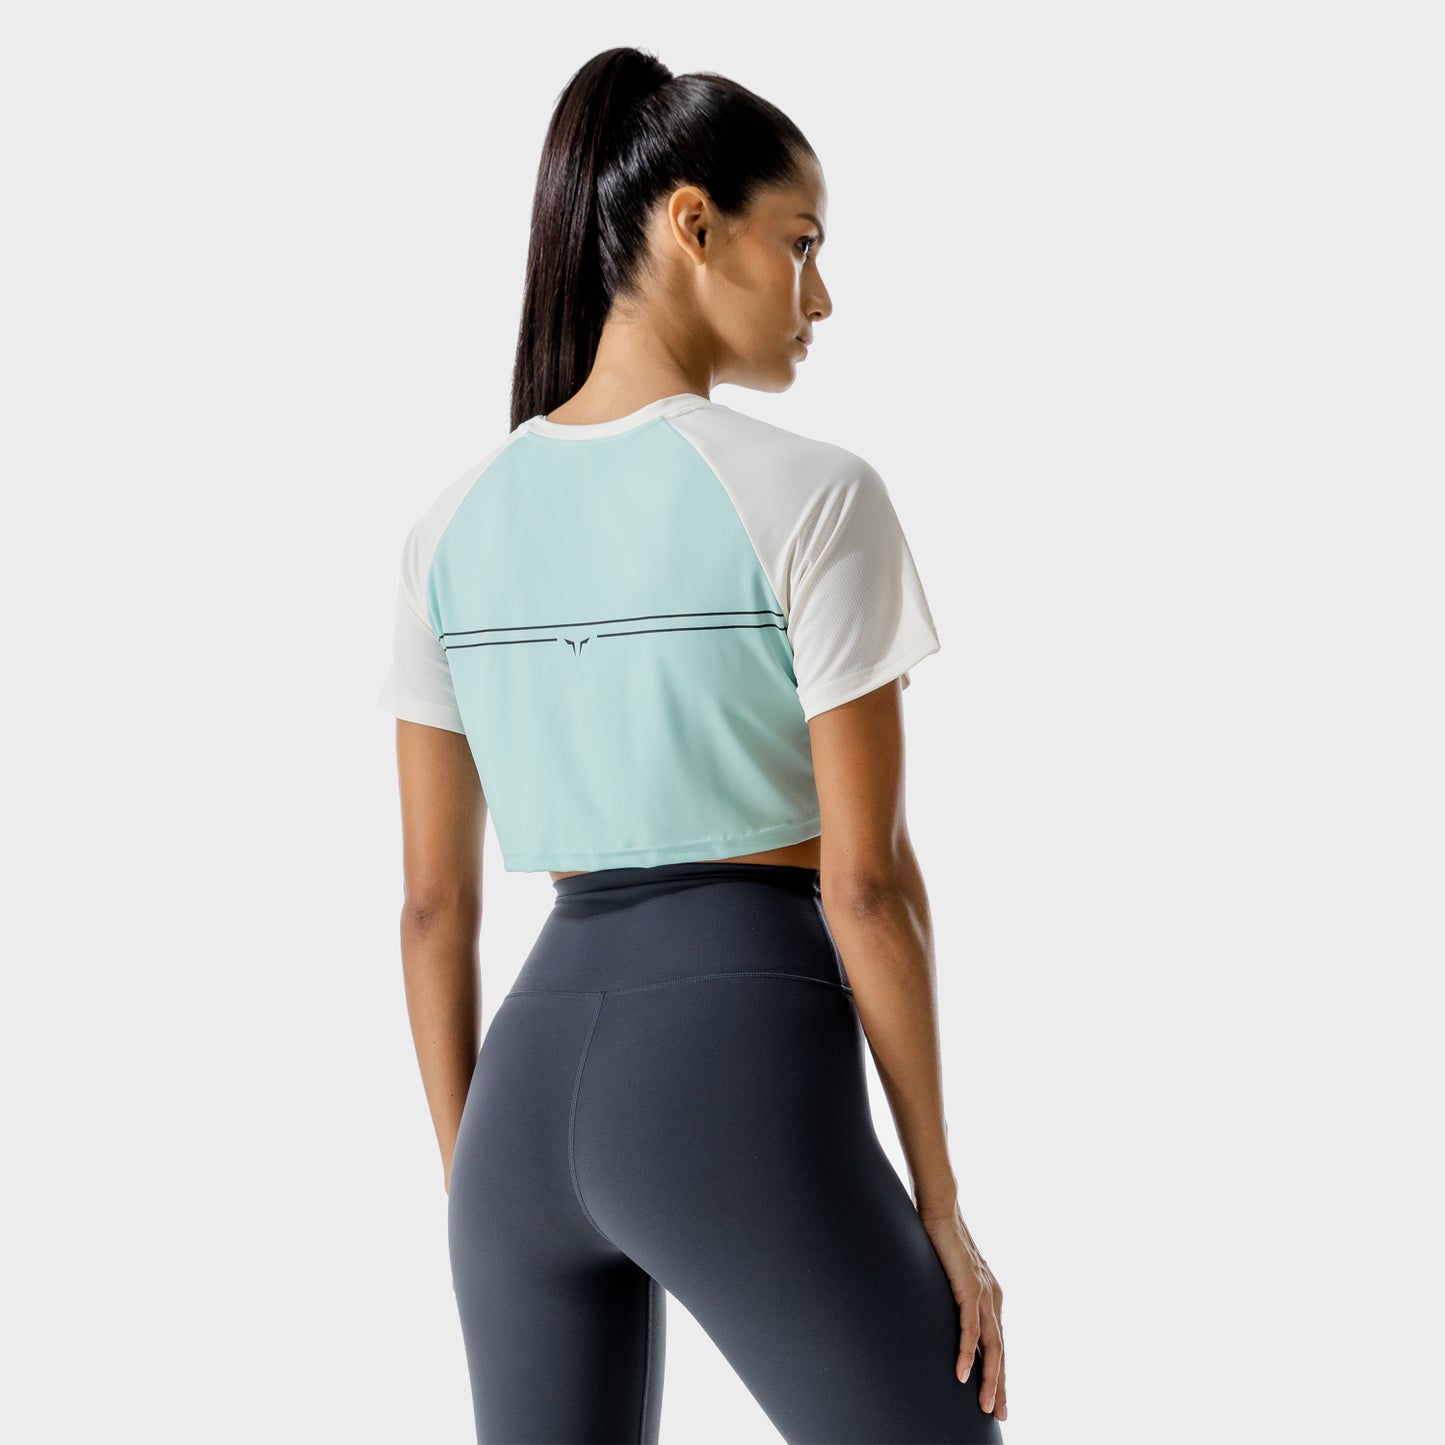 squatwolf-gym-t-shirts-for-women-lab-360-crop-tee-pastel-turquoise-workout-clothes